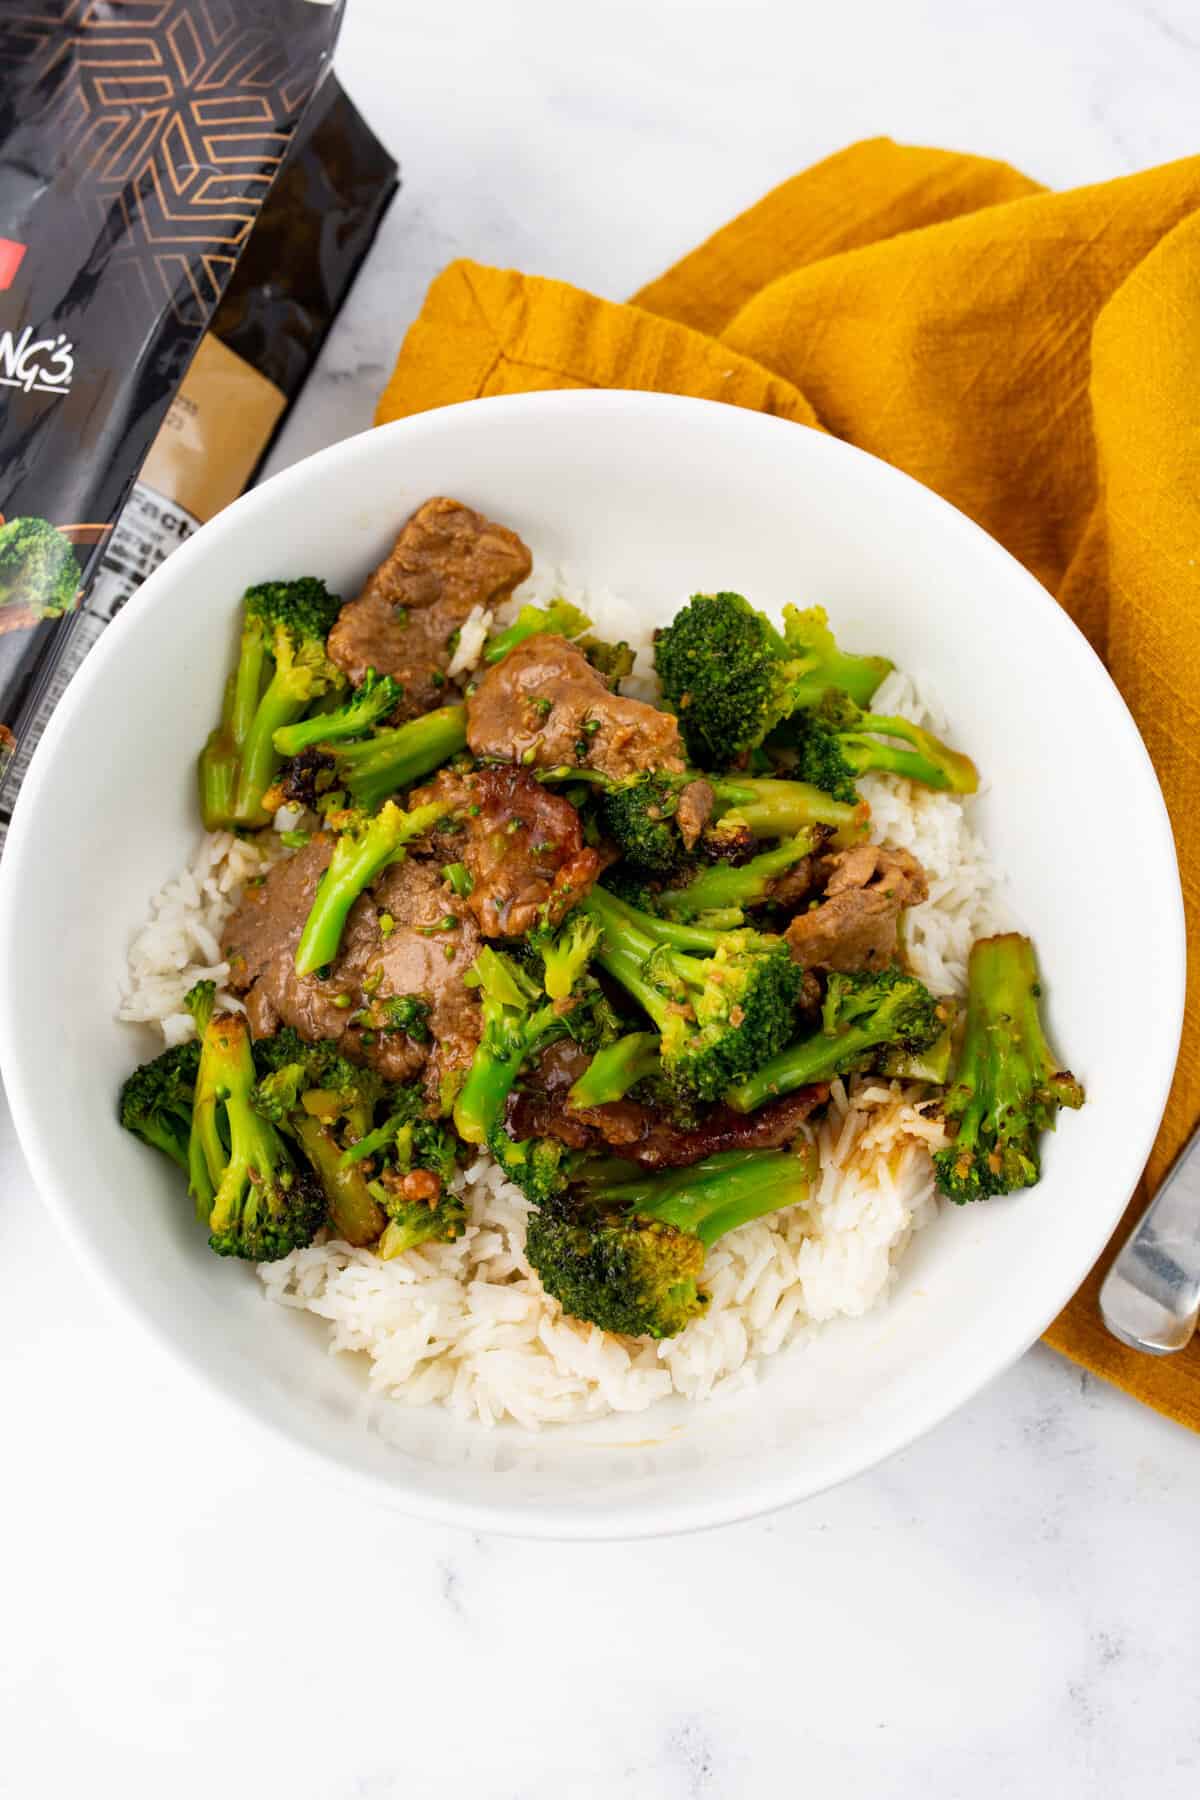 https://forktospoon.com/wp-content/uploads/2021/04/Frozen-Beef-and-Broccoli-4-scaled.jpg